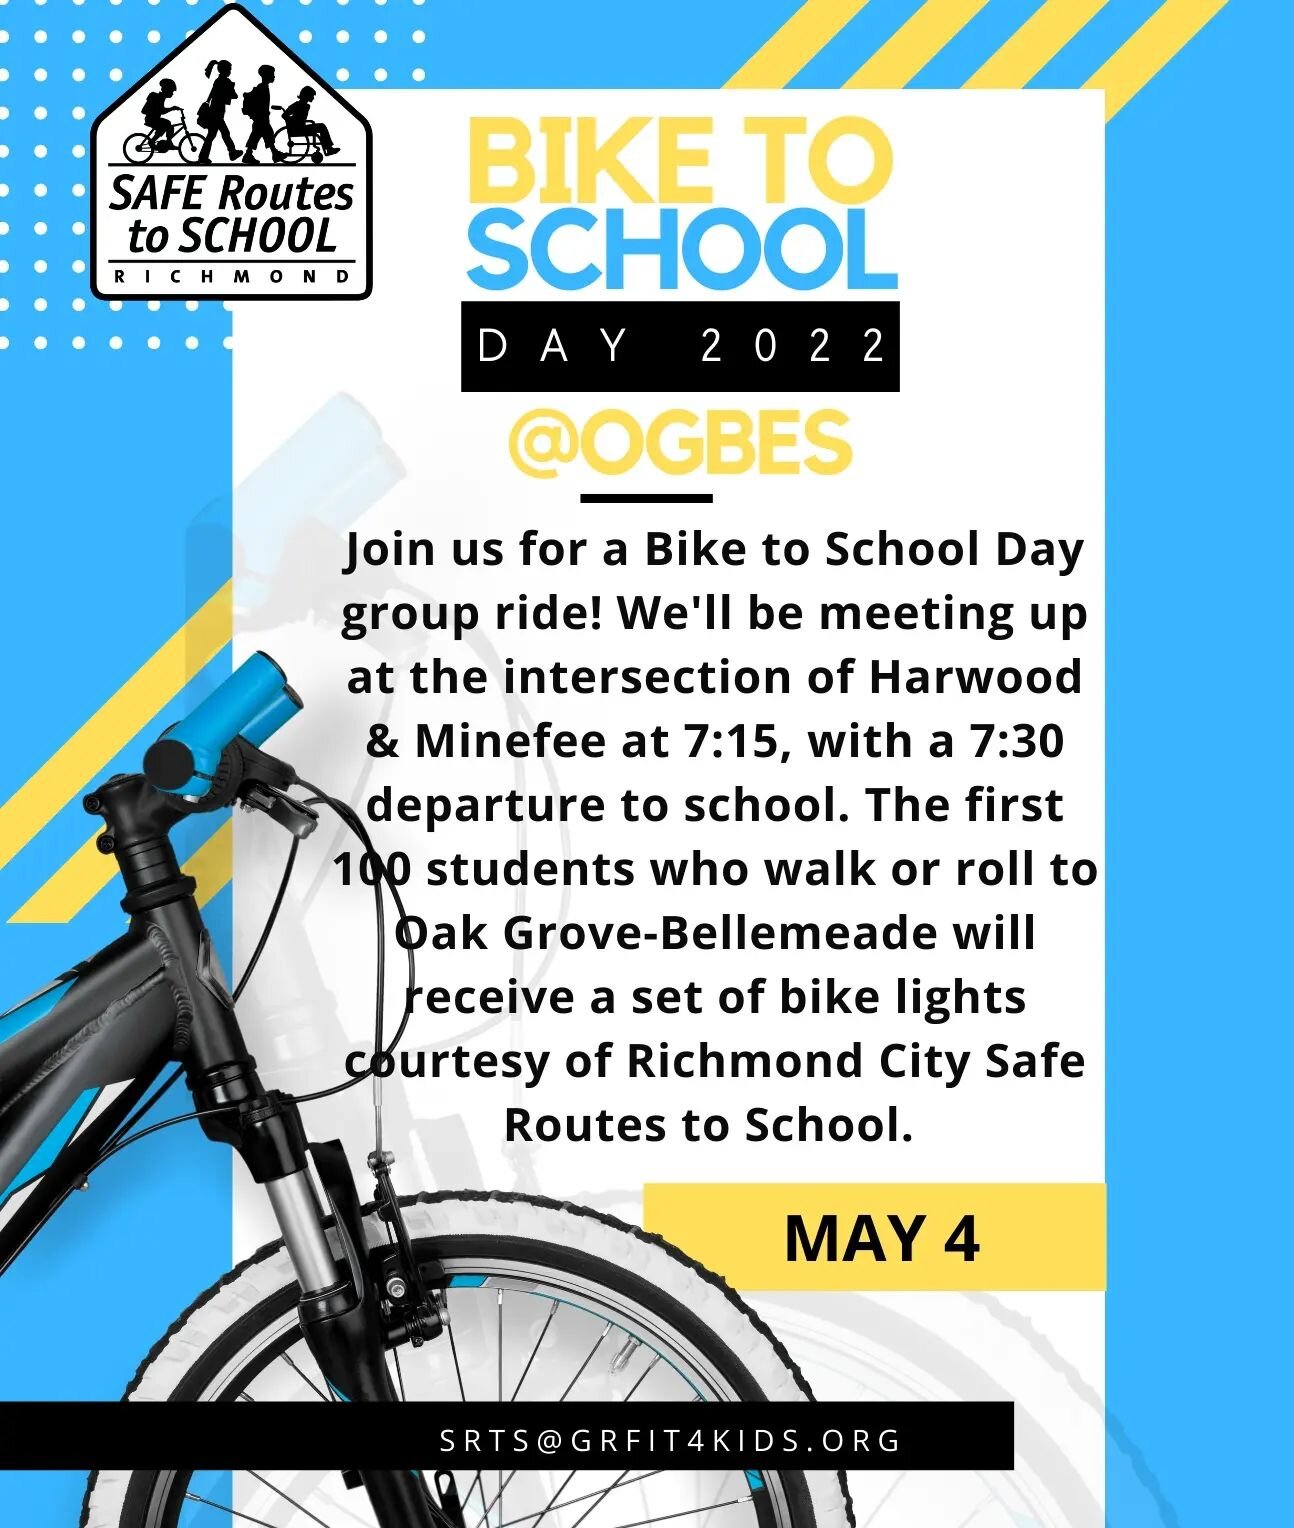 Tomorrow!! Join us for Bike to school day, as part of @bikewalkrva Bike month! We will be leading a group ride from Hillside court to Oak Grove-Bellemeade Elementary. The first 100 kids to bike or walk to school will receive a free set of bike lights